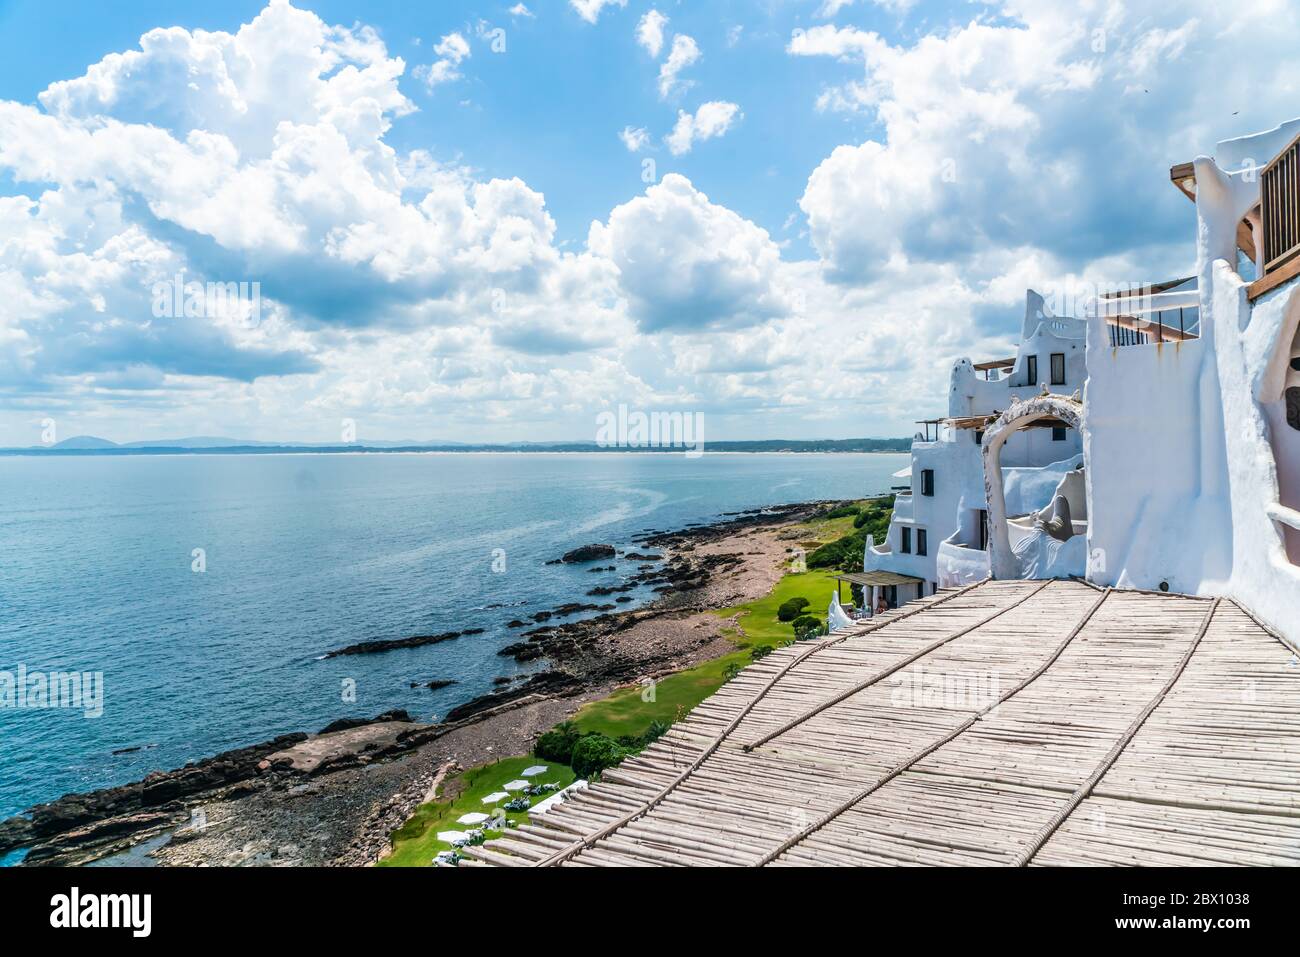 View from the famous Casapueblo, the Whitewashed cement and stucco buildings near the town of Punta Del Este, Uruguay, January 28th 2019 Stock Photo